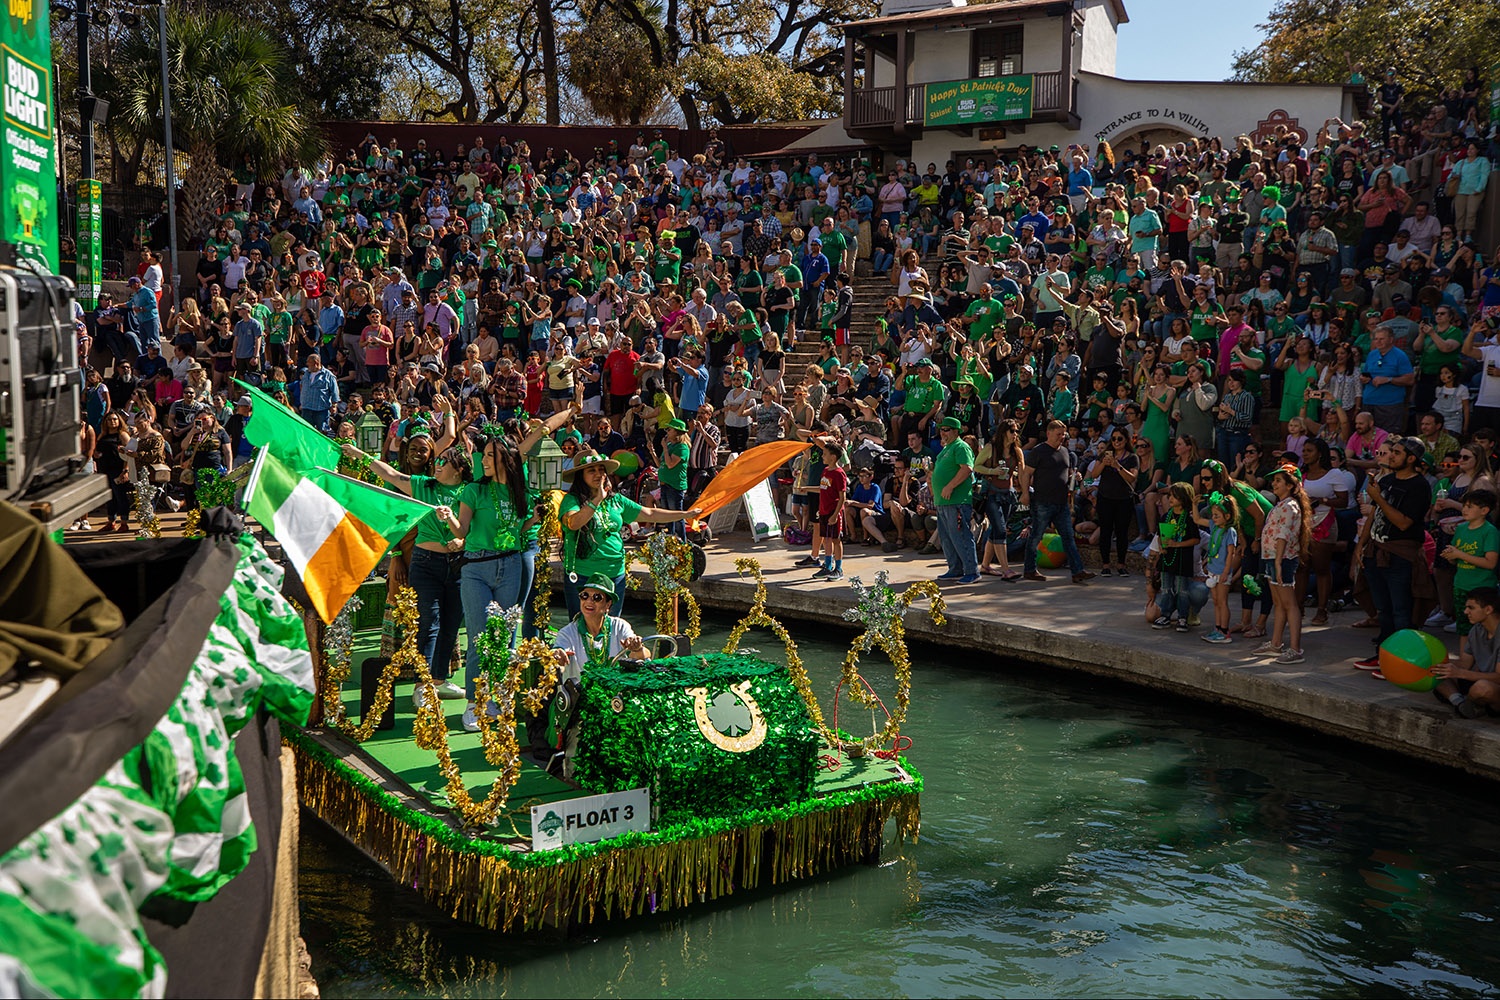 Several decorated floats parade through the River Walk in San Antonio, Texas, during a St. Patrick's Day-themed river parade sponsored by Visit San Antonio River Walk and the Harp & Shamrock Society of Texas on Saturday afternoon, March 19, 2022. Photo by Kaylee Greenlee Beal | @kgreenleephoto | Heron contributor